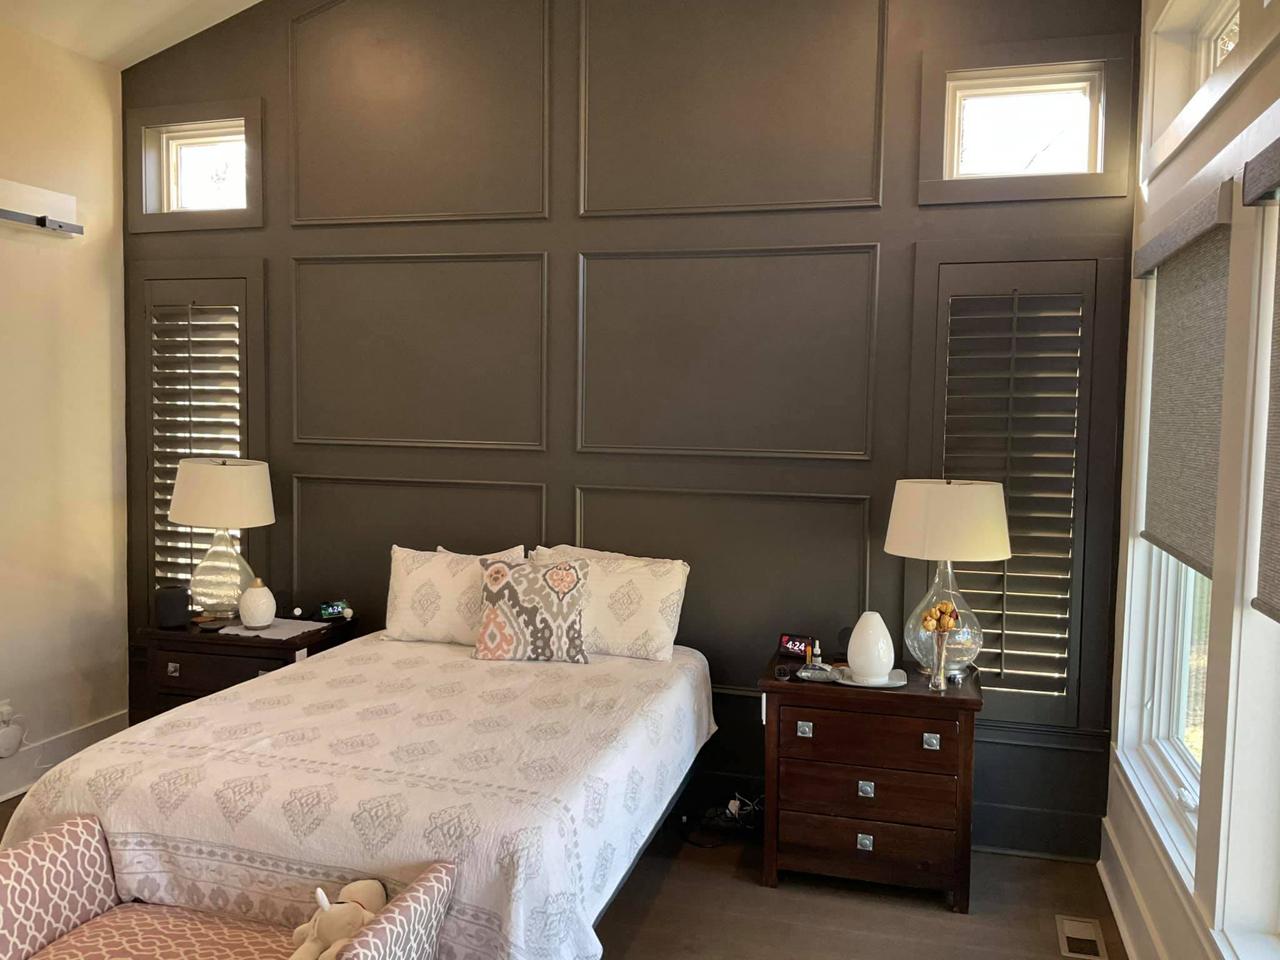 Stained Heritage Shutters in a bedroom